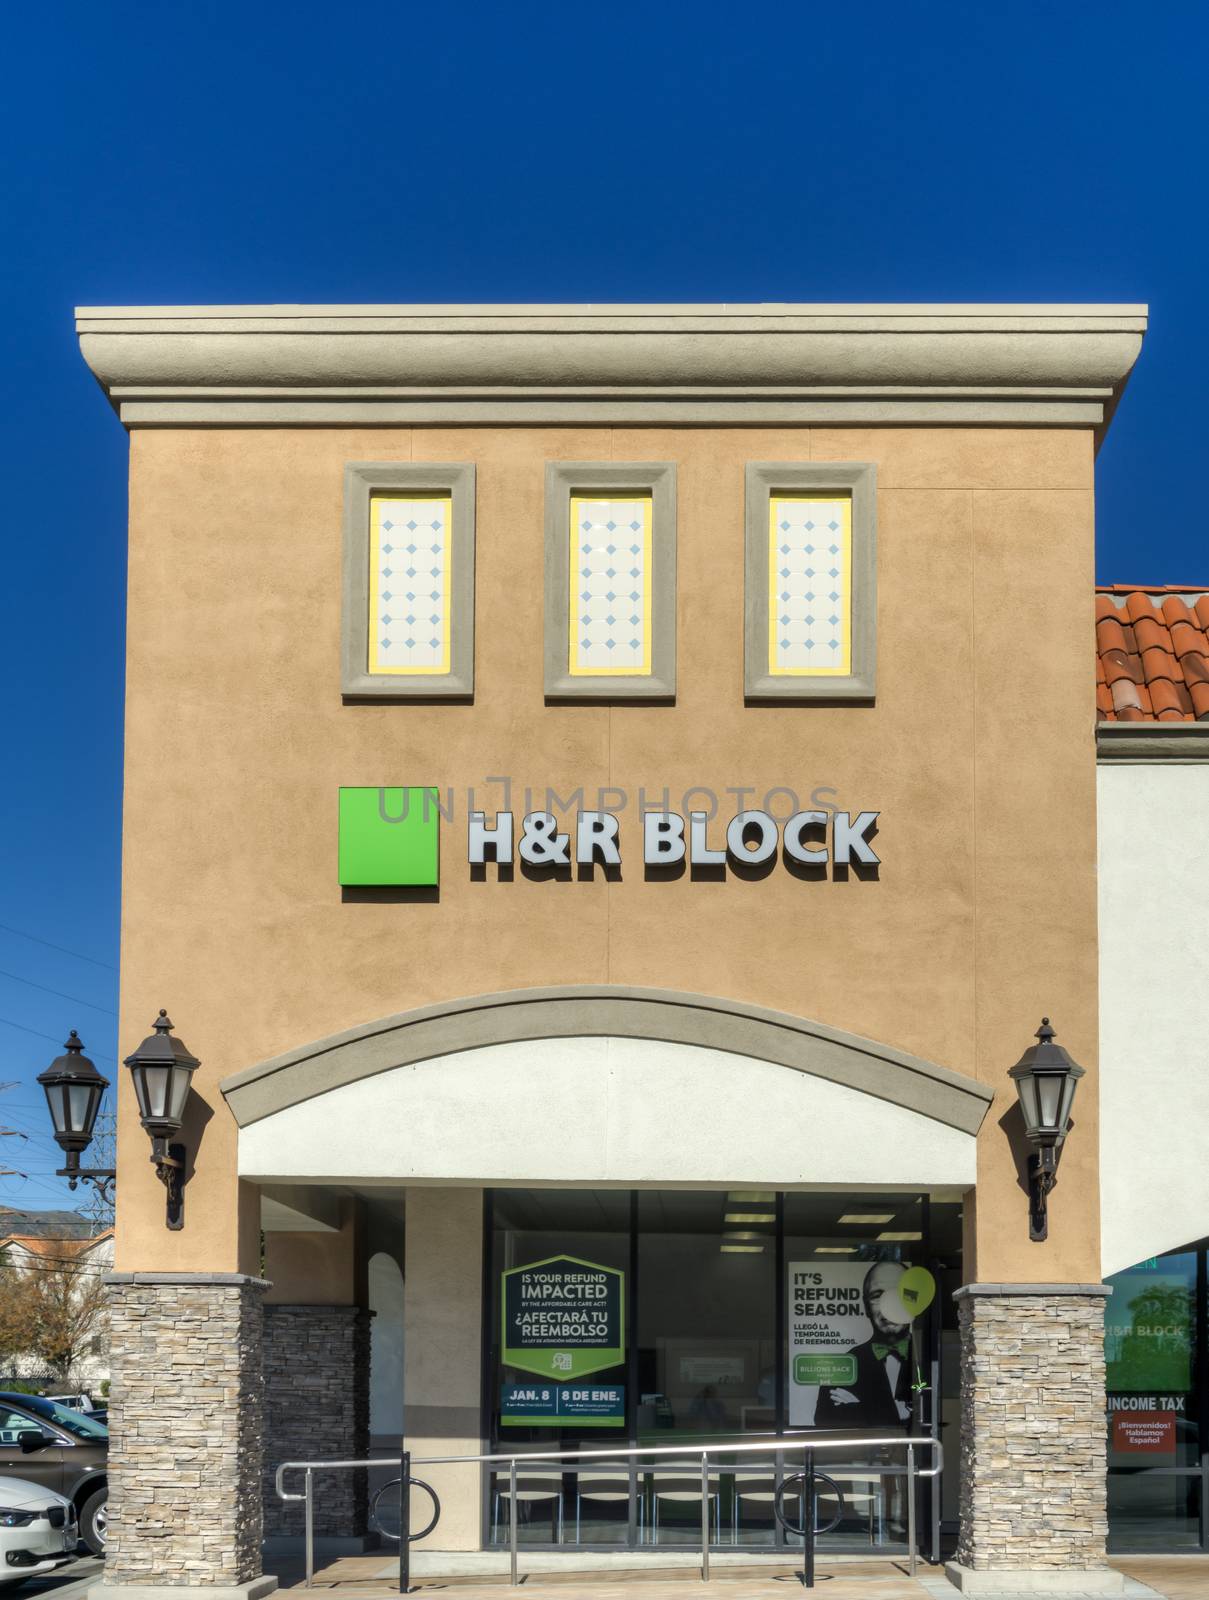 GRANADA HILLS, CA/USA - JANUARY 7, 2015: H & R Block Retail Exterior. H & R Block is a tax preparation company in the United States.